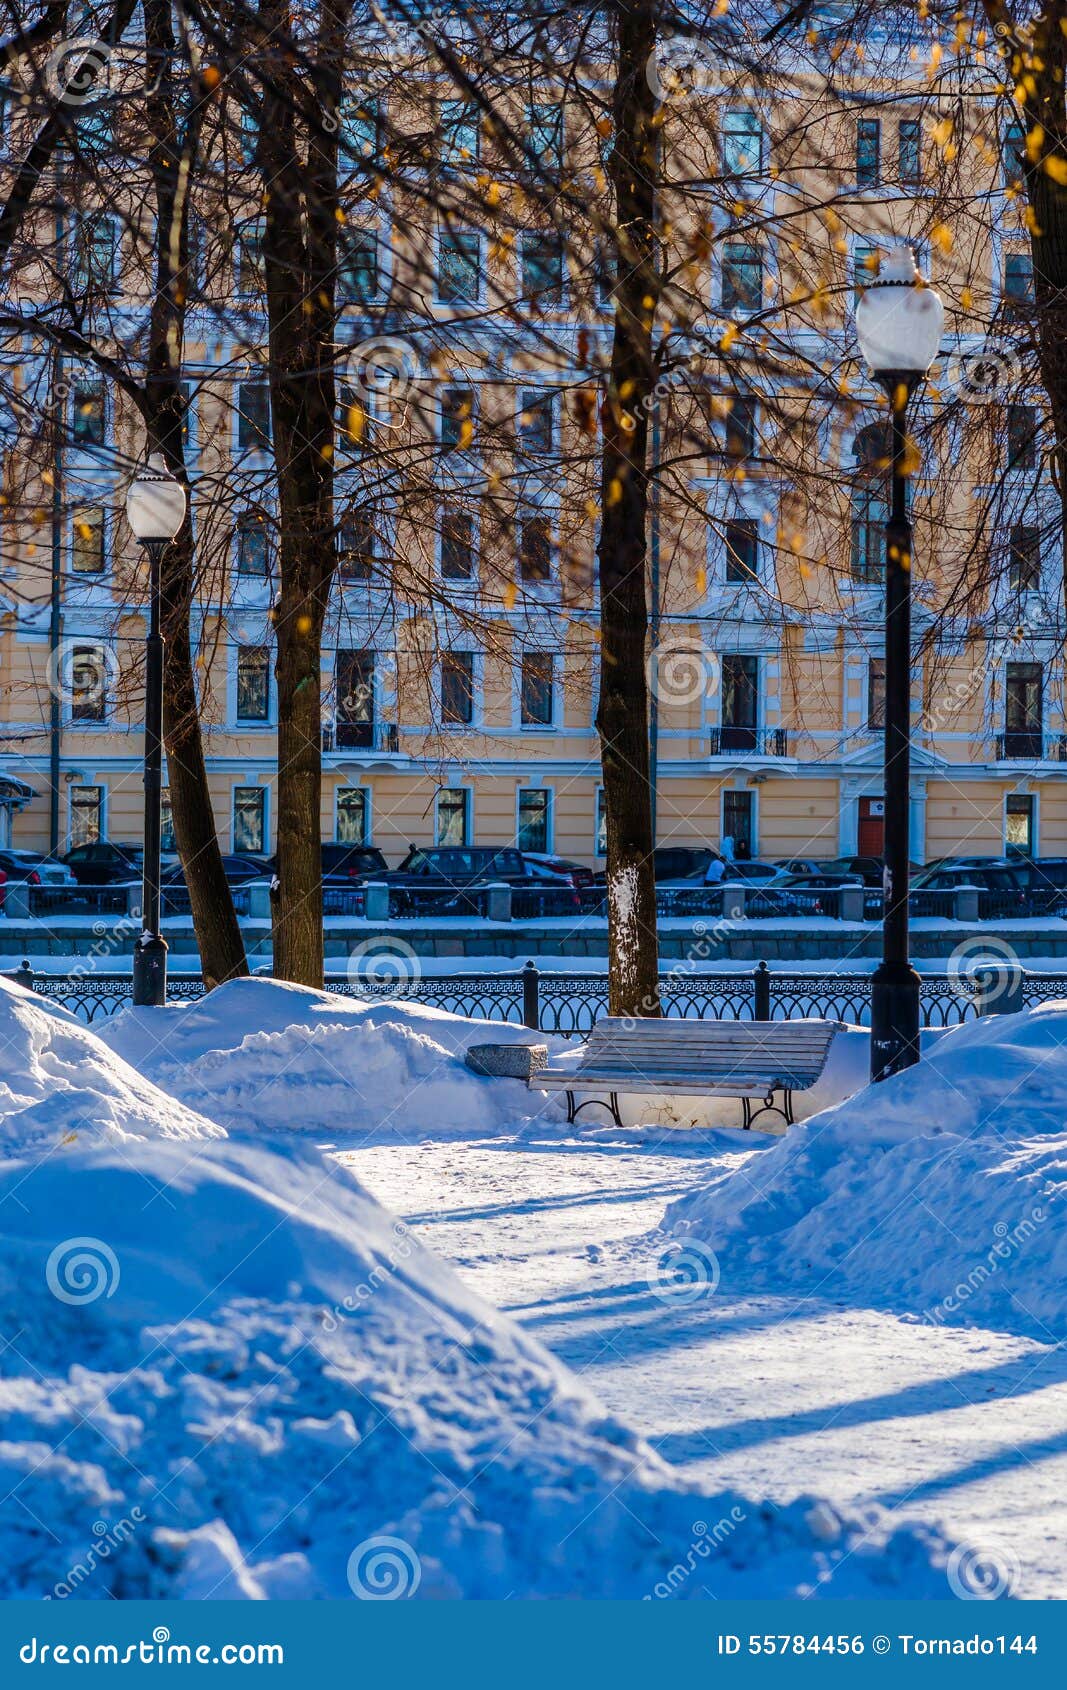 Empty Bench In A Small Snow Covered Street Garden Stock Photo